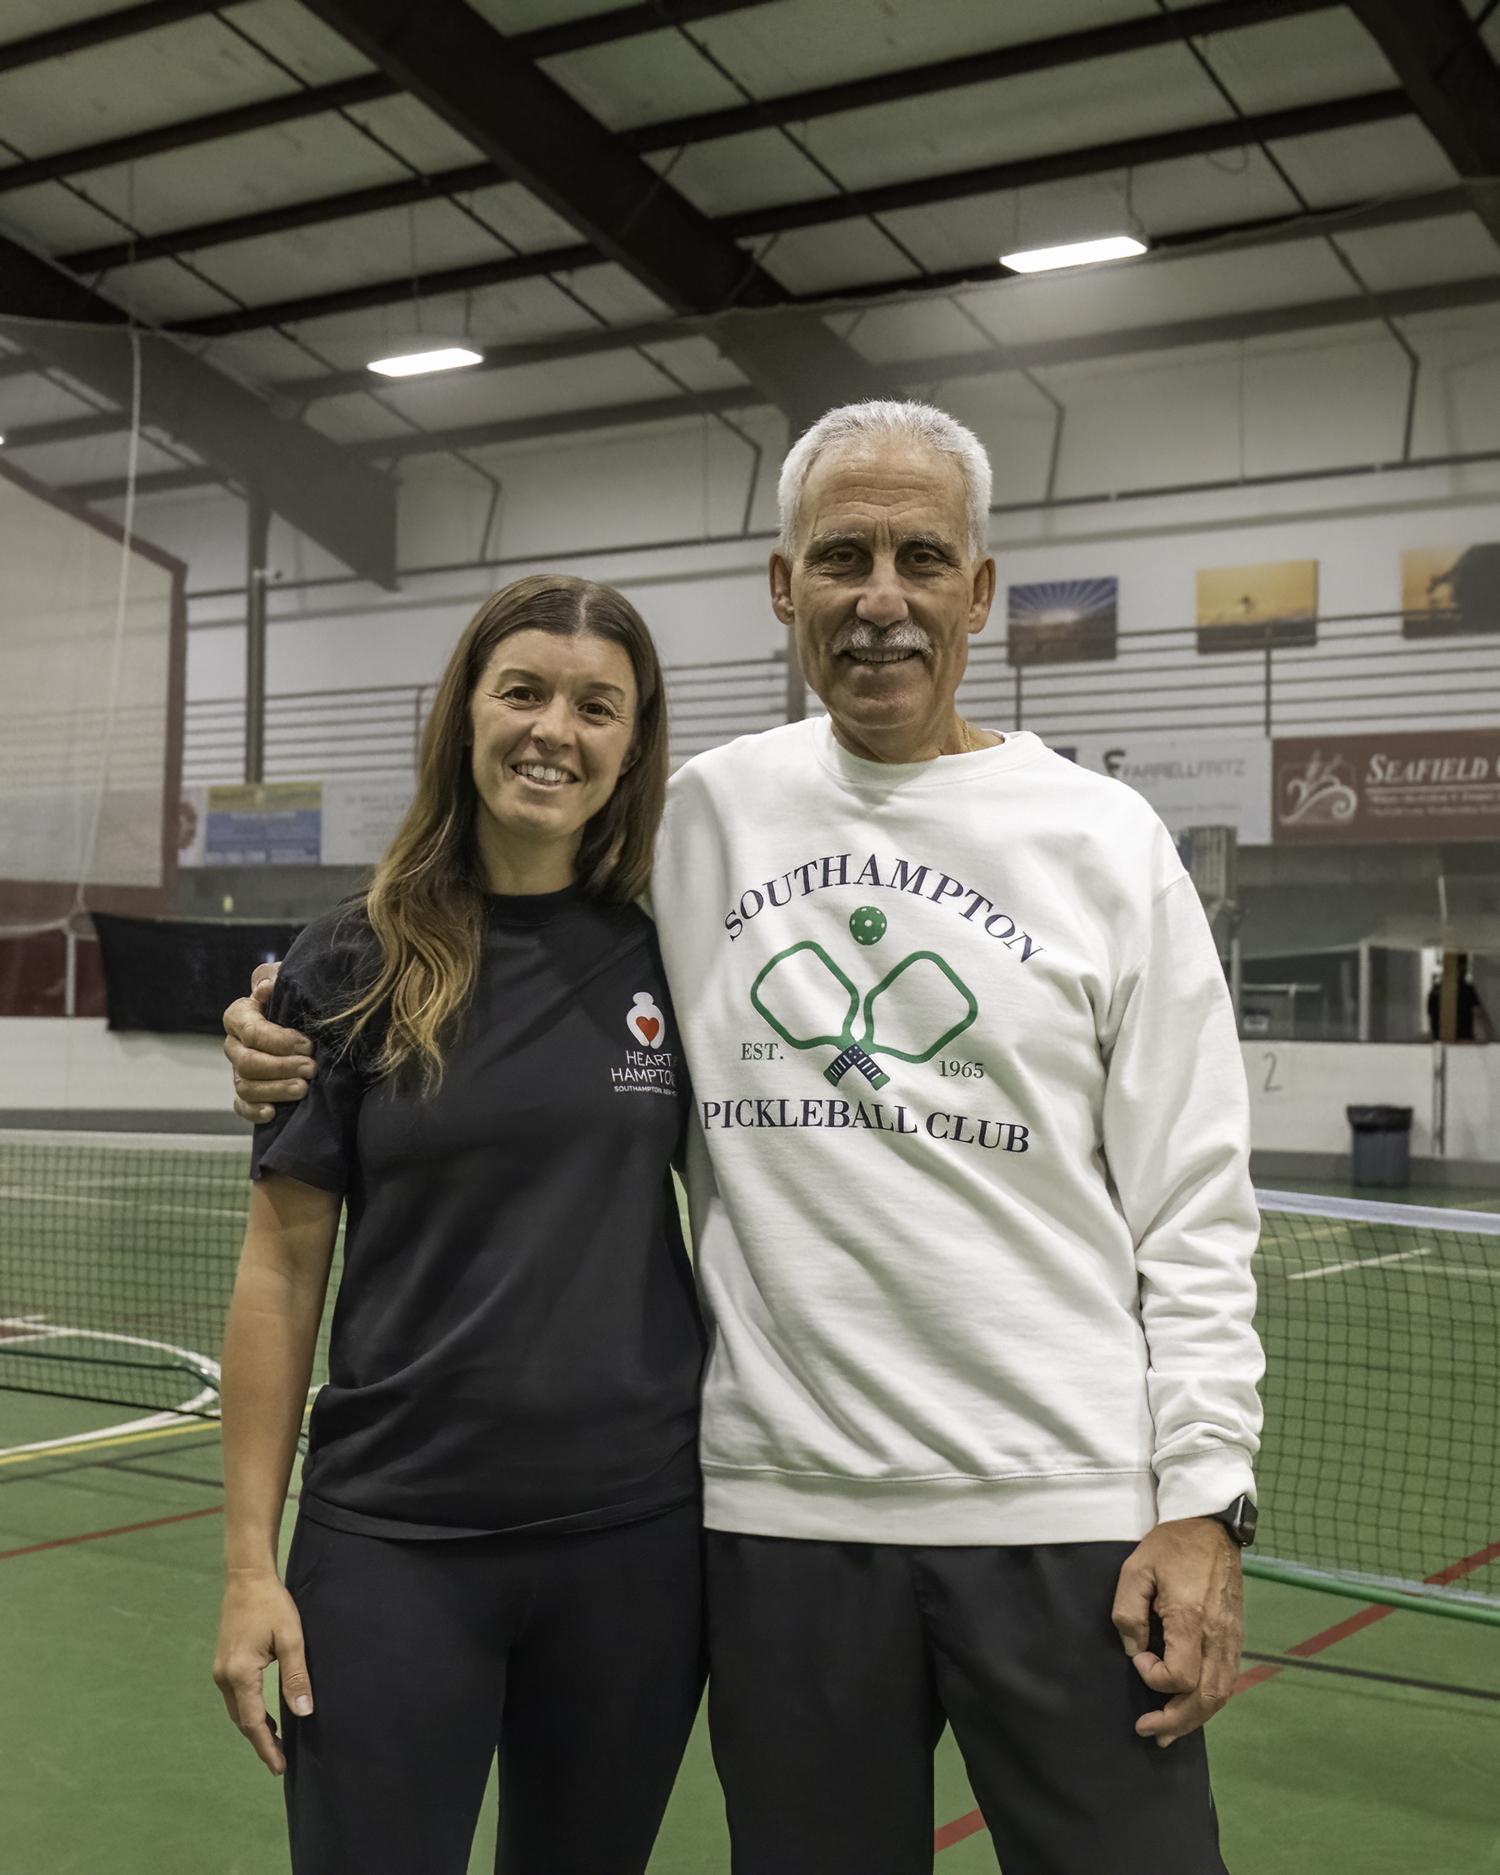 Heart of the Hamptons Executive Director Molly Bishop with Vinny Mangano at last year's Southampton Pickleball Club Heart of the Hamptons Tournament.   MARIANNE BARNETT